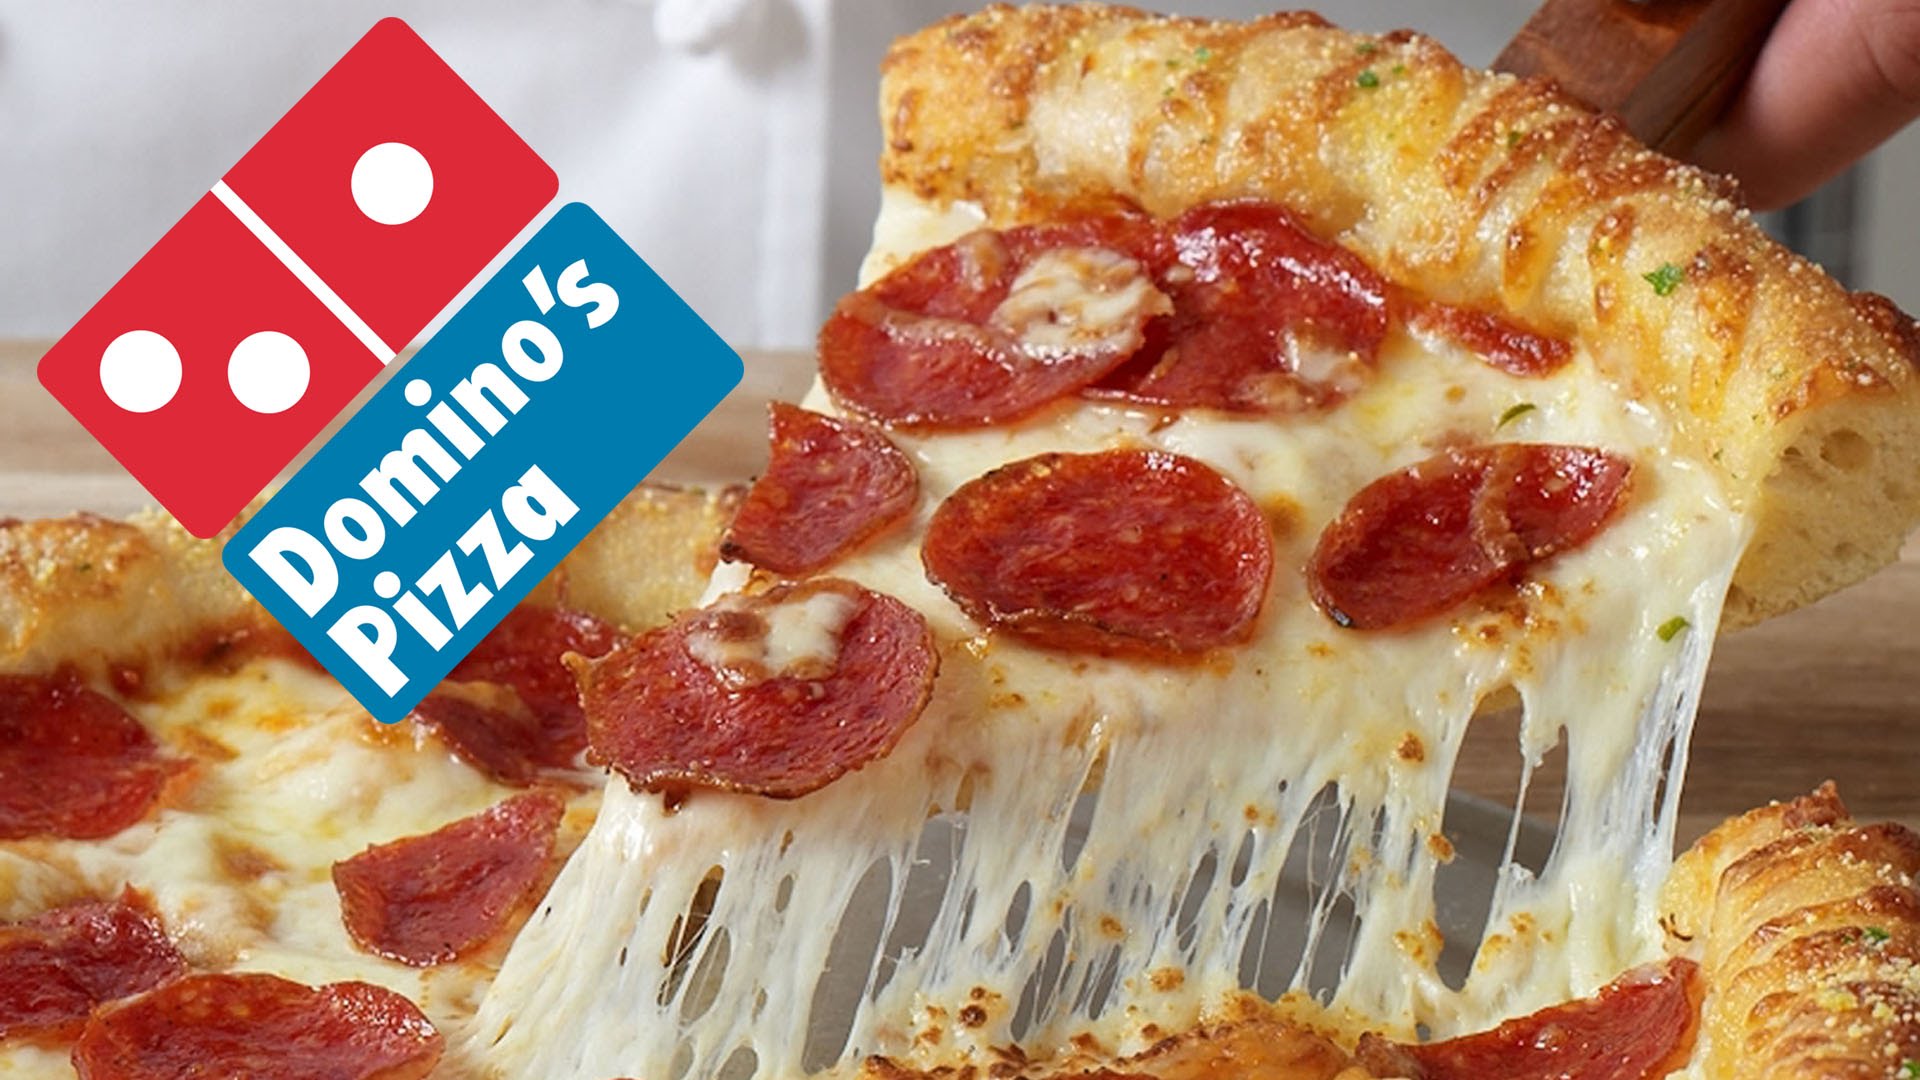 Domino’s® “You Tip, We Tip” is Tipping Customers Who Tip Their Delivery Drivers